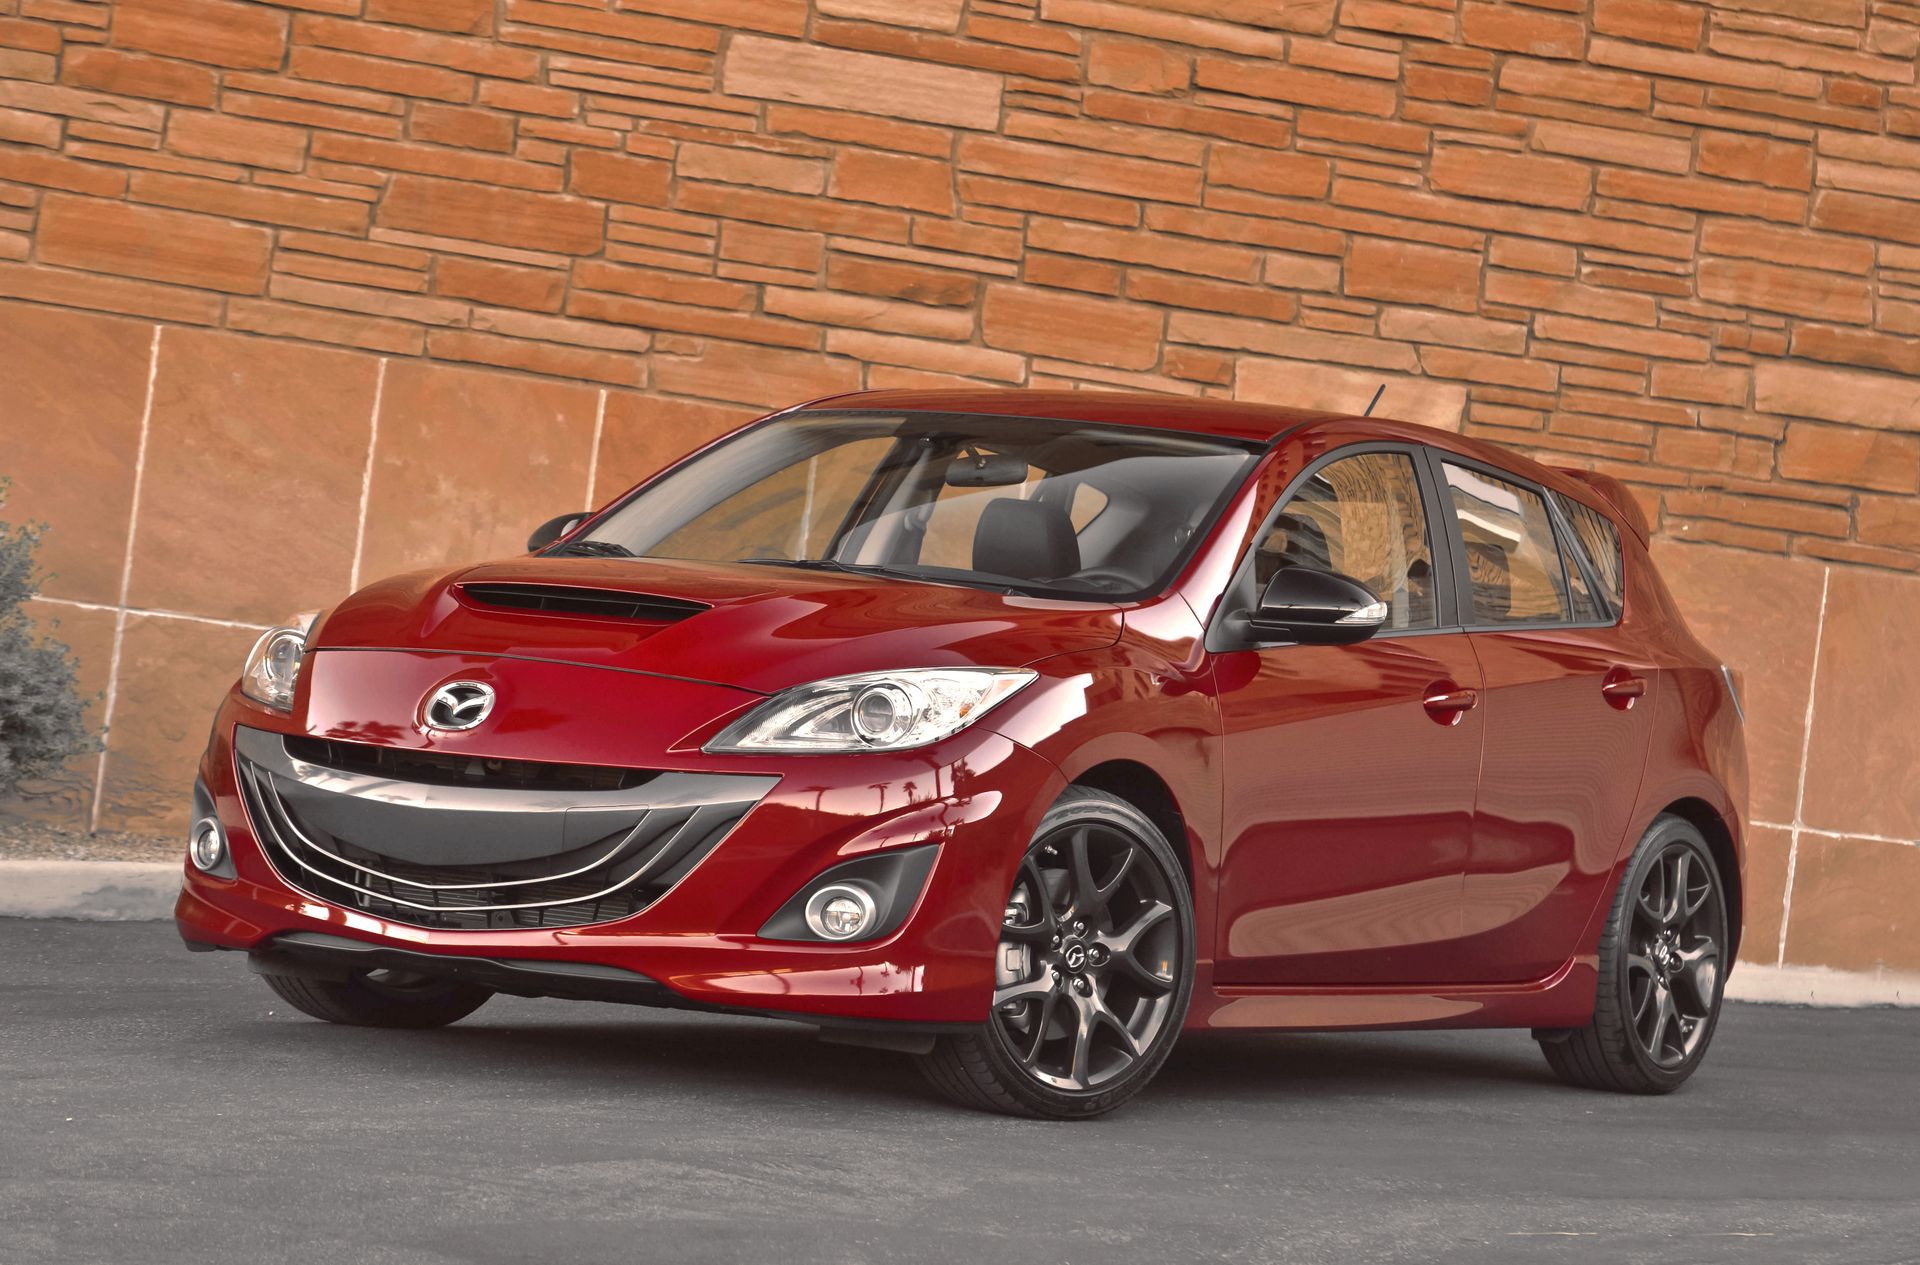 Mazdaspeed3 Picture Number